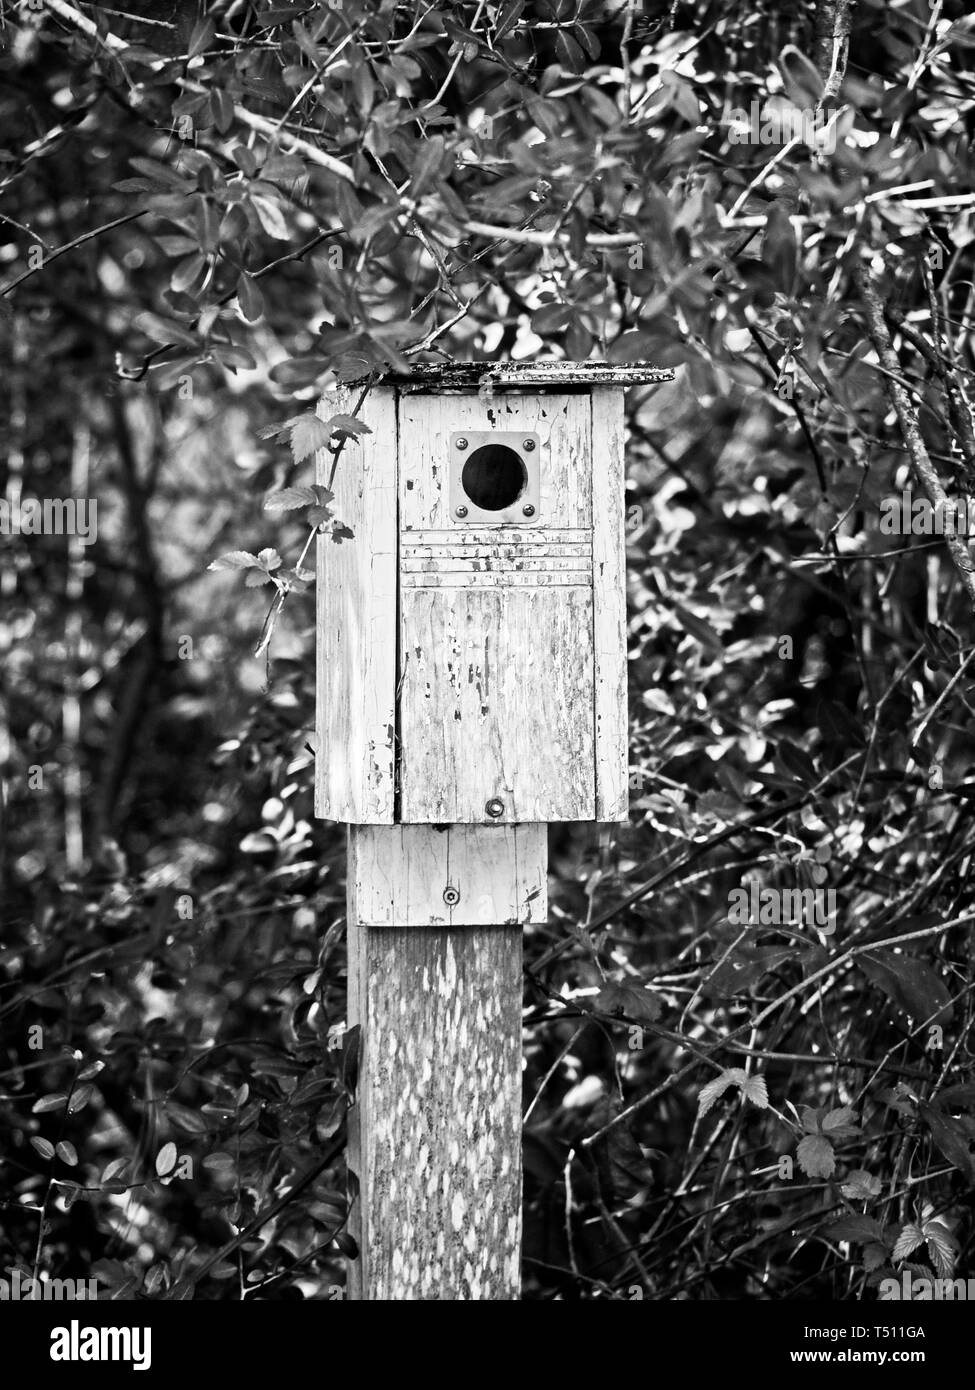 The Woodlands, TX USA - 02/17/2019  -  Old Birdhouse in Woods in B&W Stock Photo